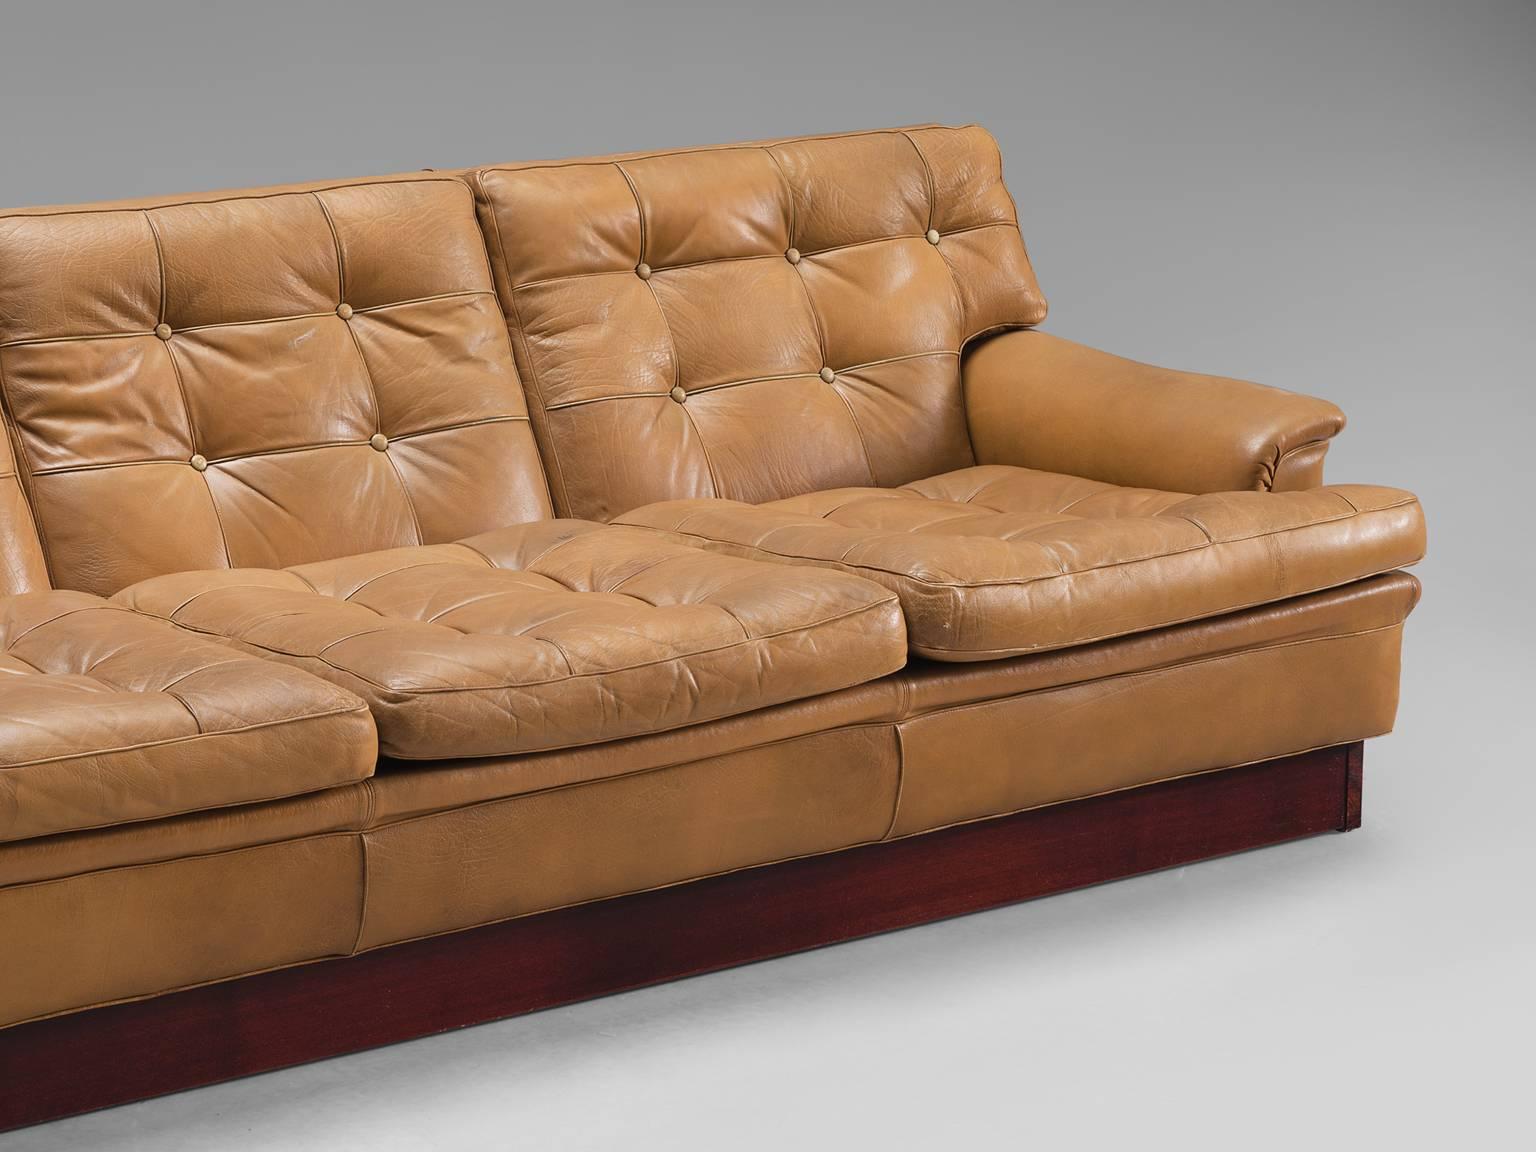 Late 20th Century Arne Norell Tufted Cognac Leather Sofa